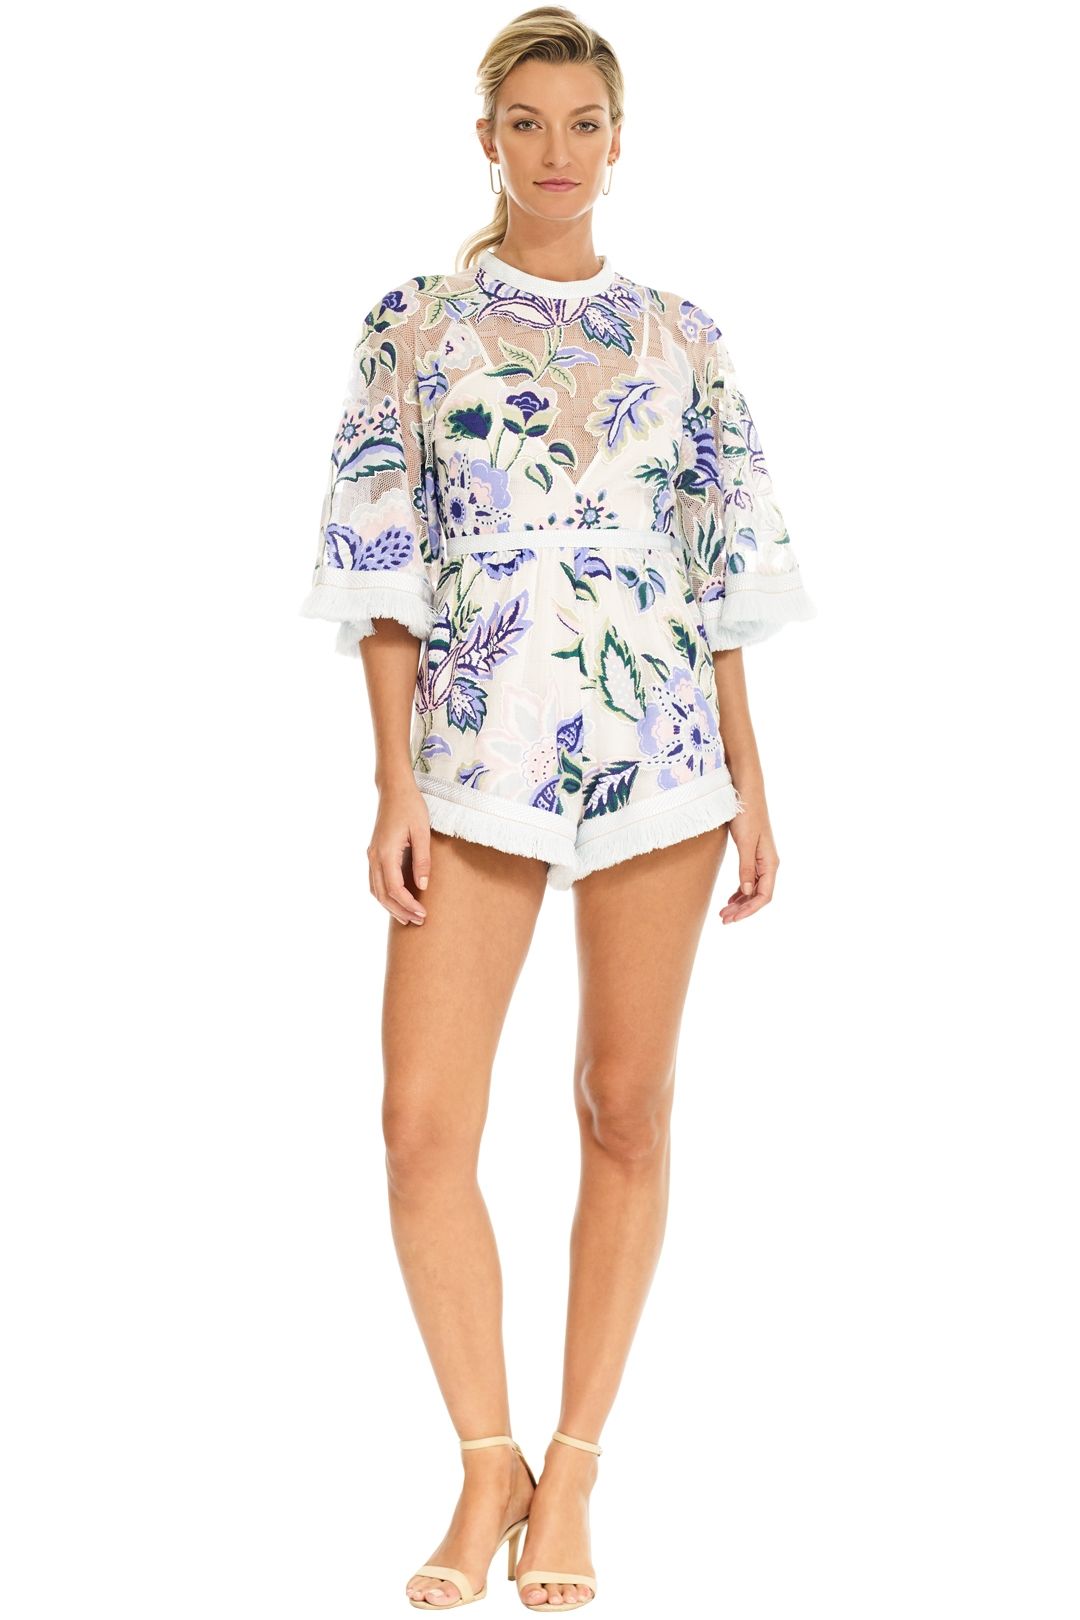 Alice McCall - Georgie Boy Playsuit - White Thistle - Front